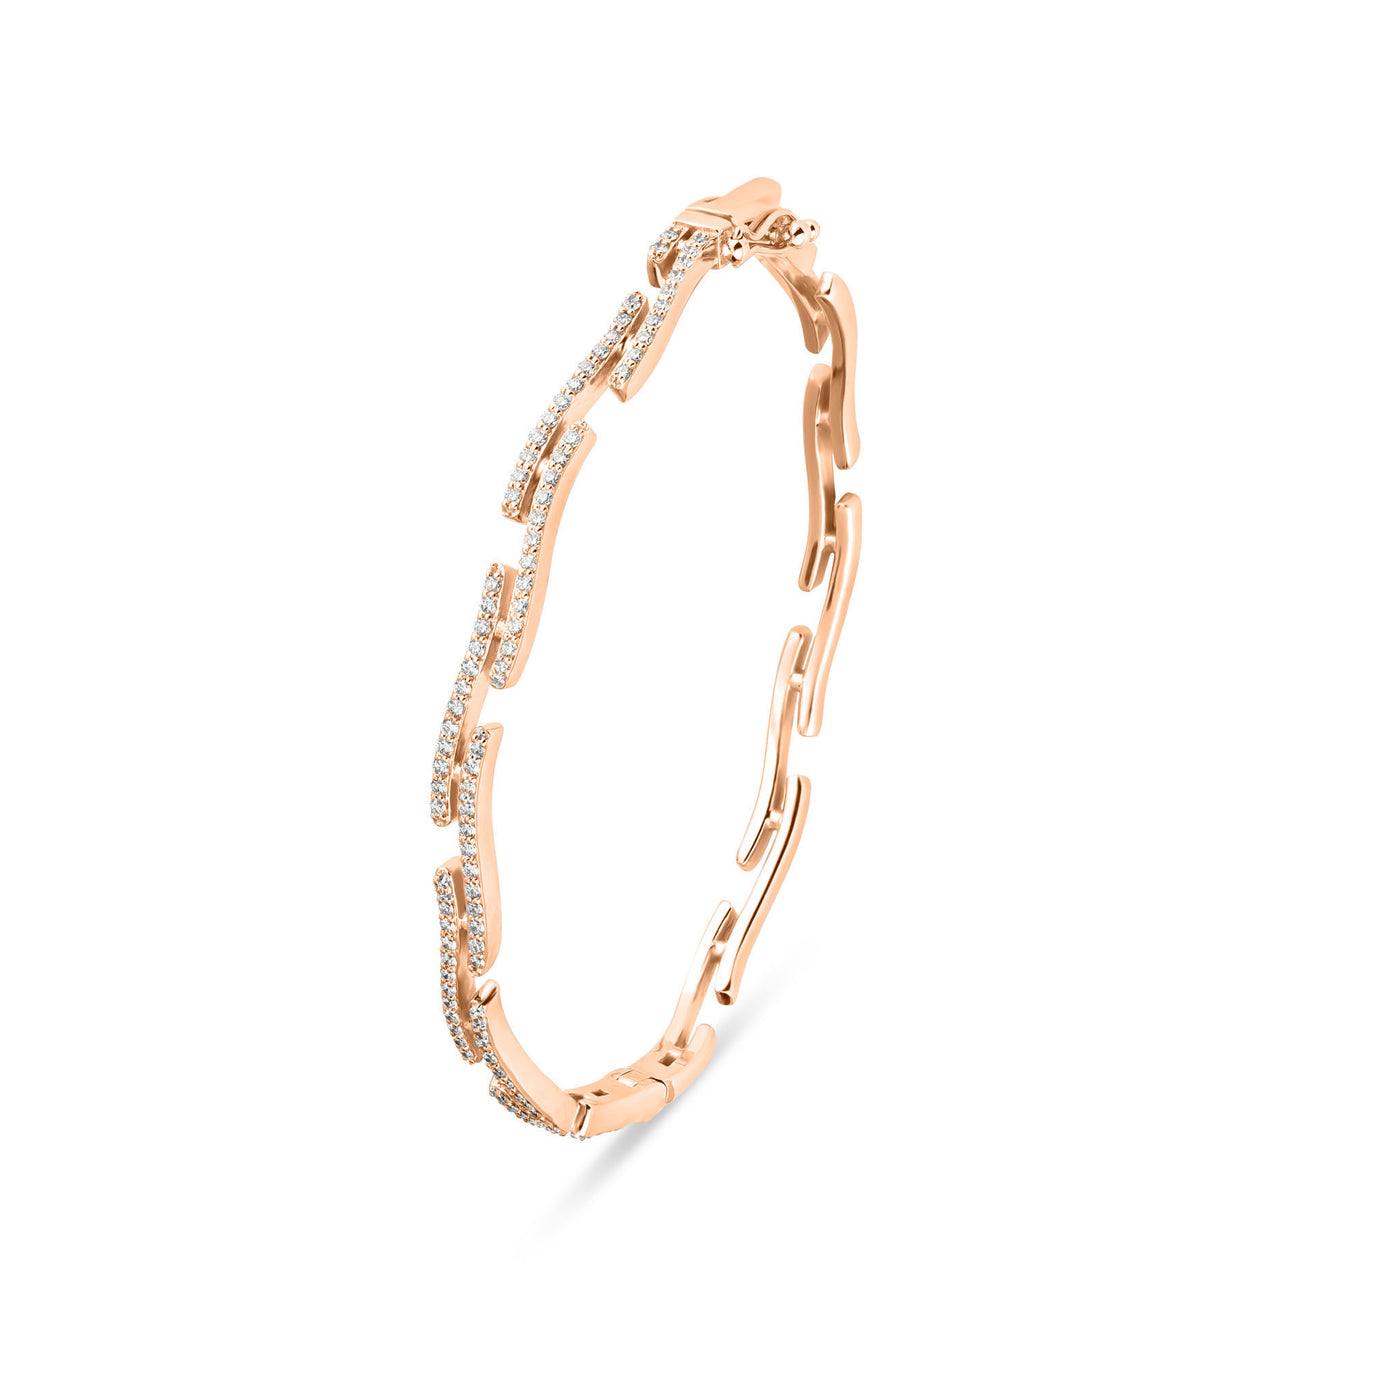 Soit Belle Wavy Rose Gold Diamond Jewelry for a Stylish Statement